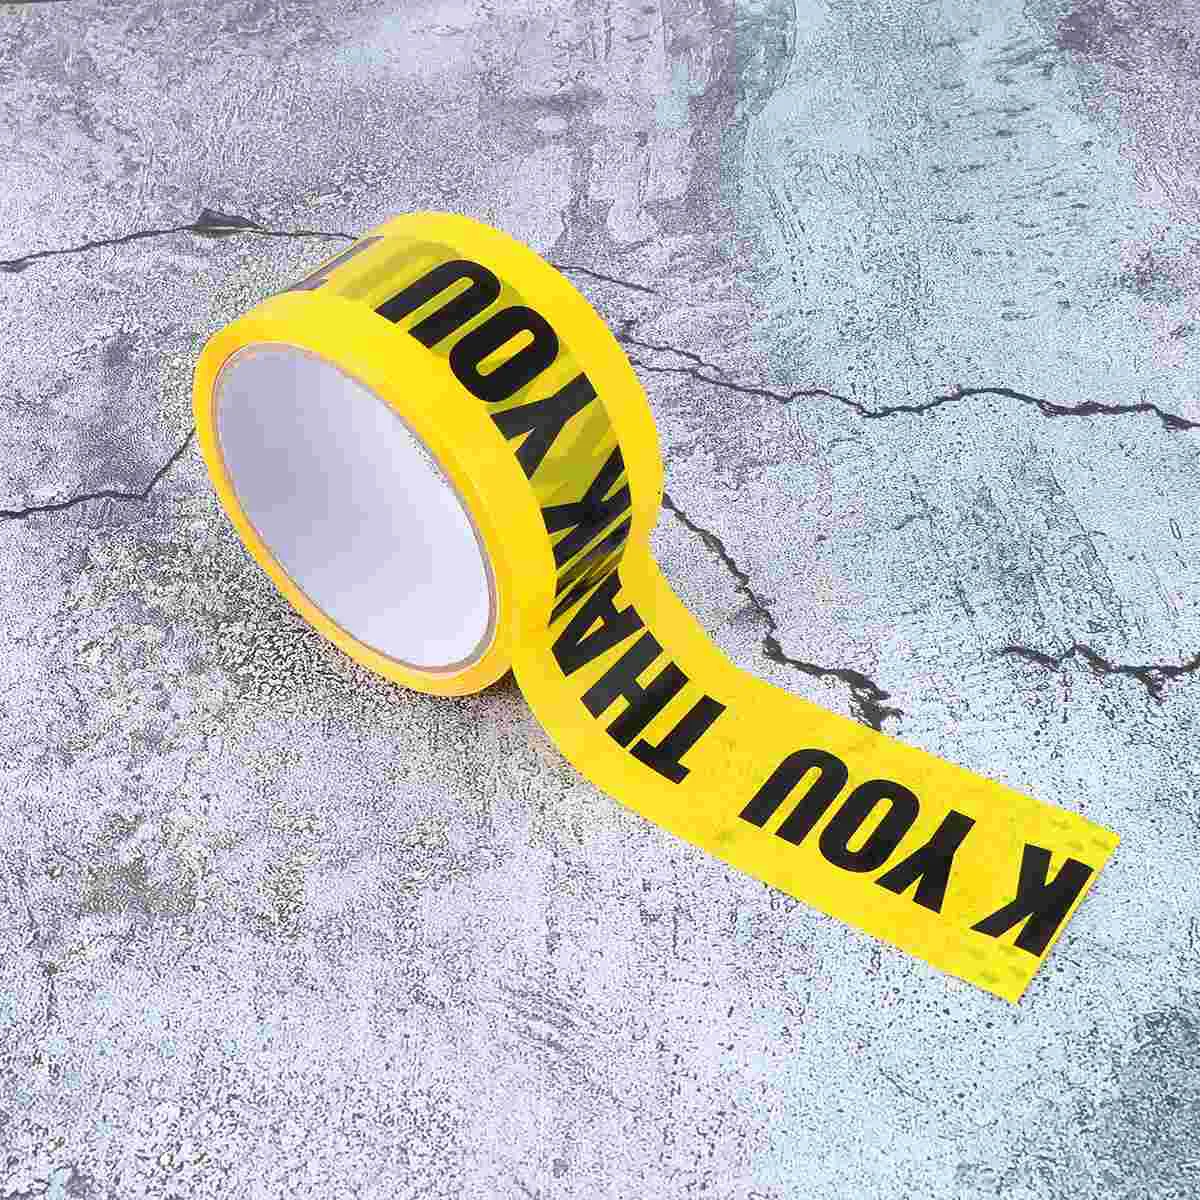 

1 Roll THANK YOU Safety Tape Safe Self Adhesive Sticker Warning Tape Masking Tape for Walls Floors Pipes (Yellow) Marking